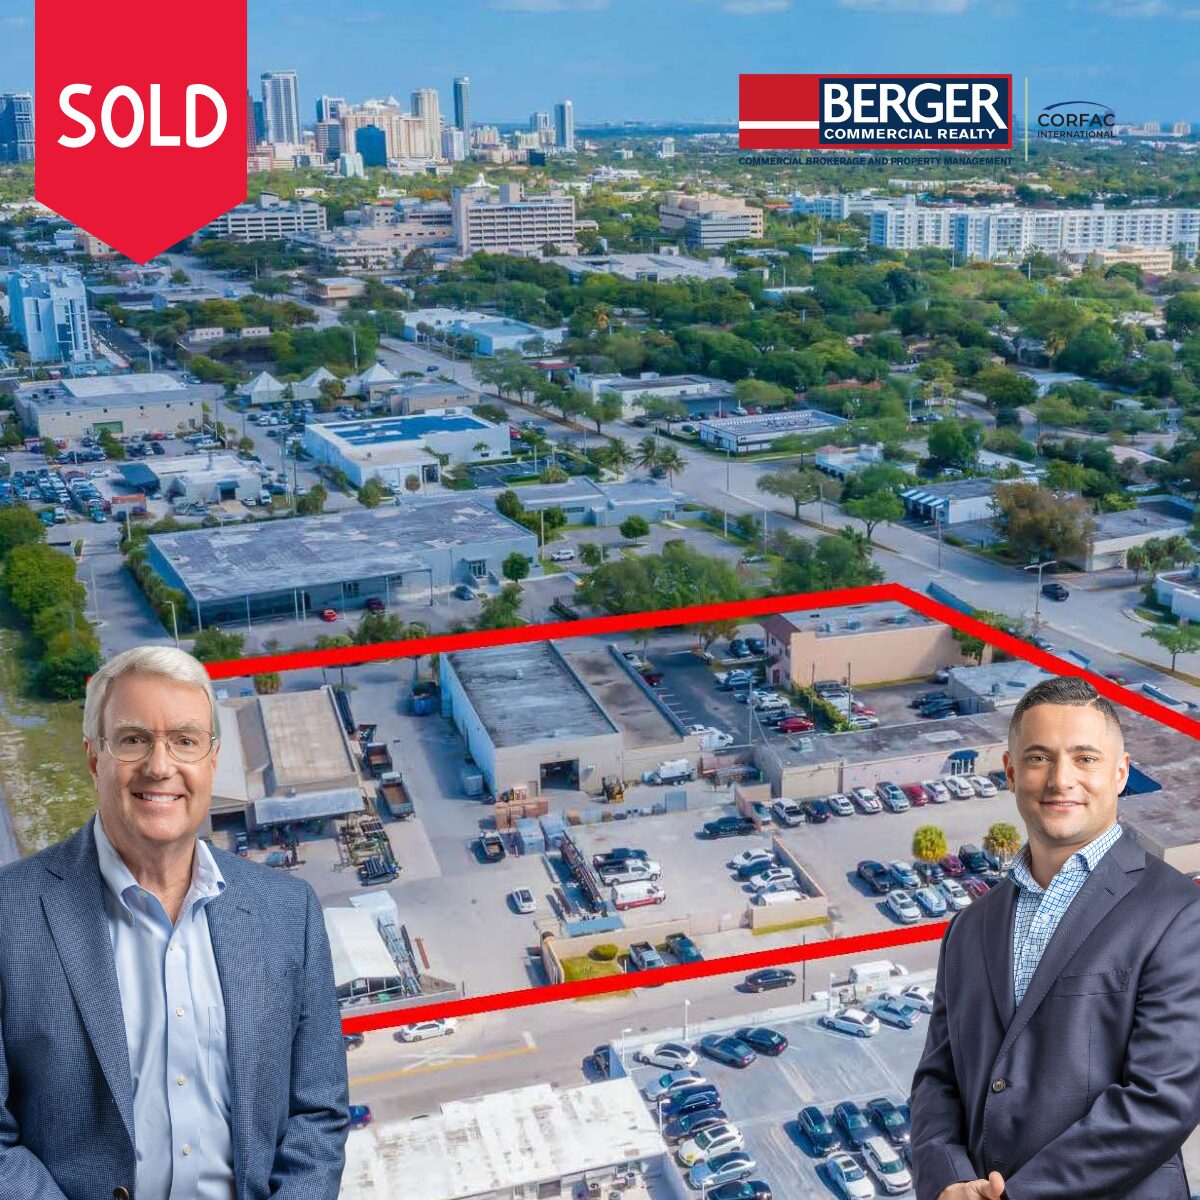 Berger Commercial Realty’s St. George Guardabassi, Jordan Beck Rep Seller In Sale Of Complete City Block For $15.2 Million